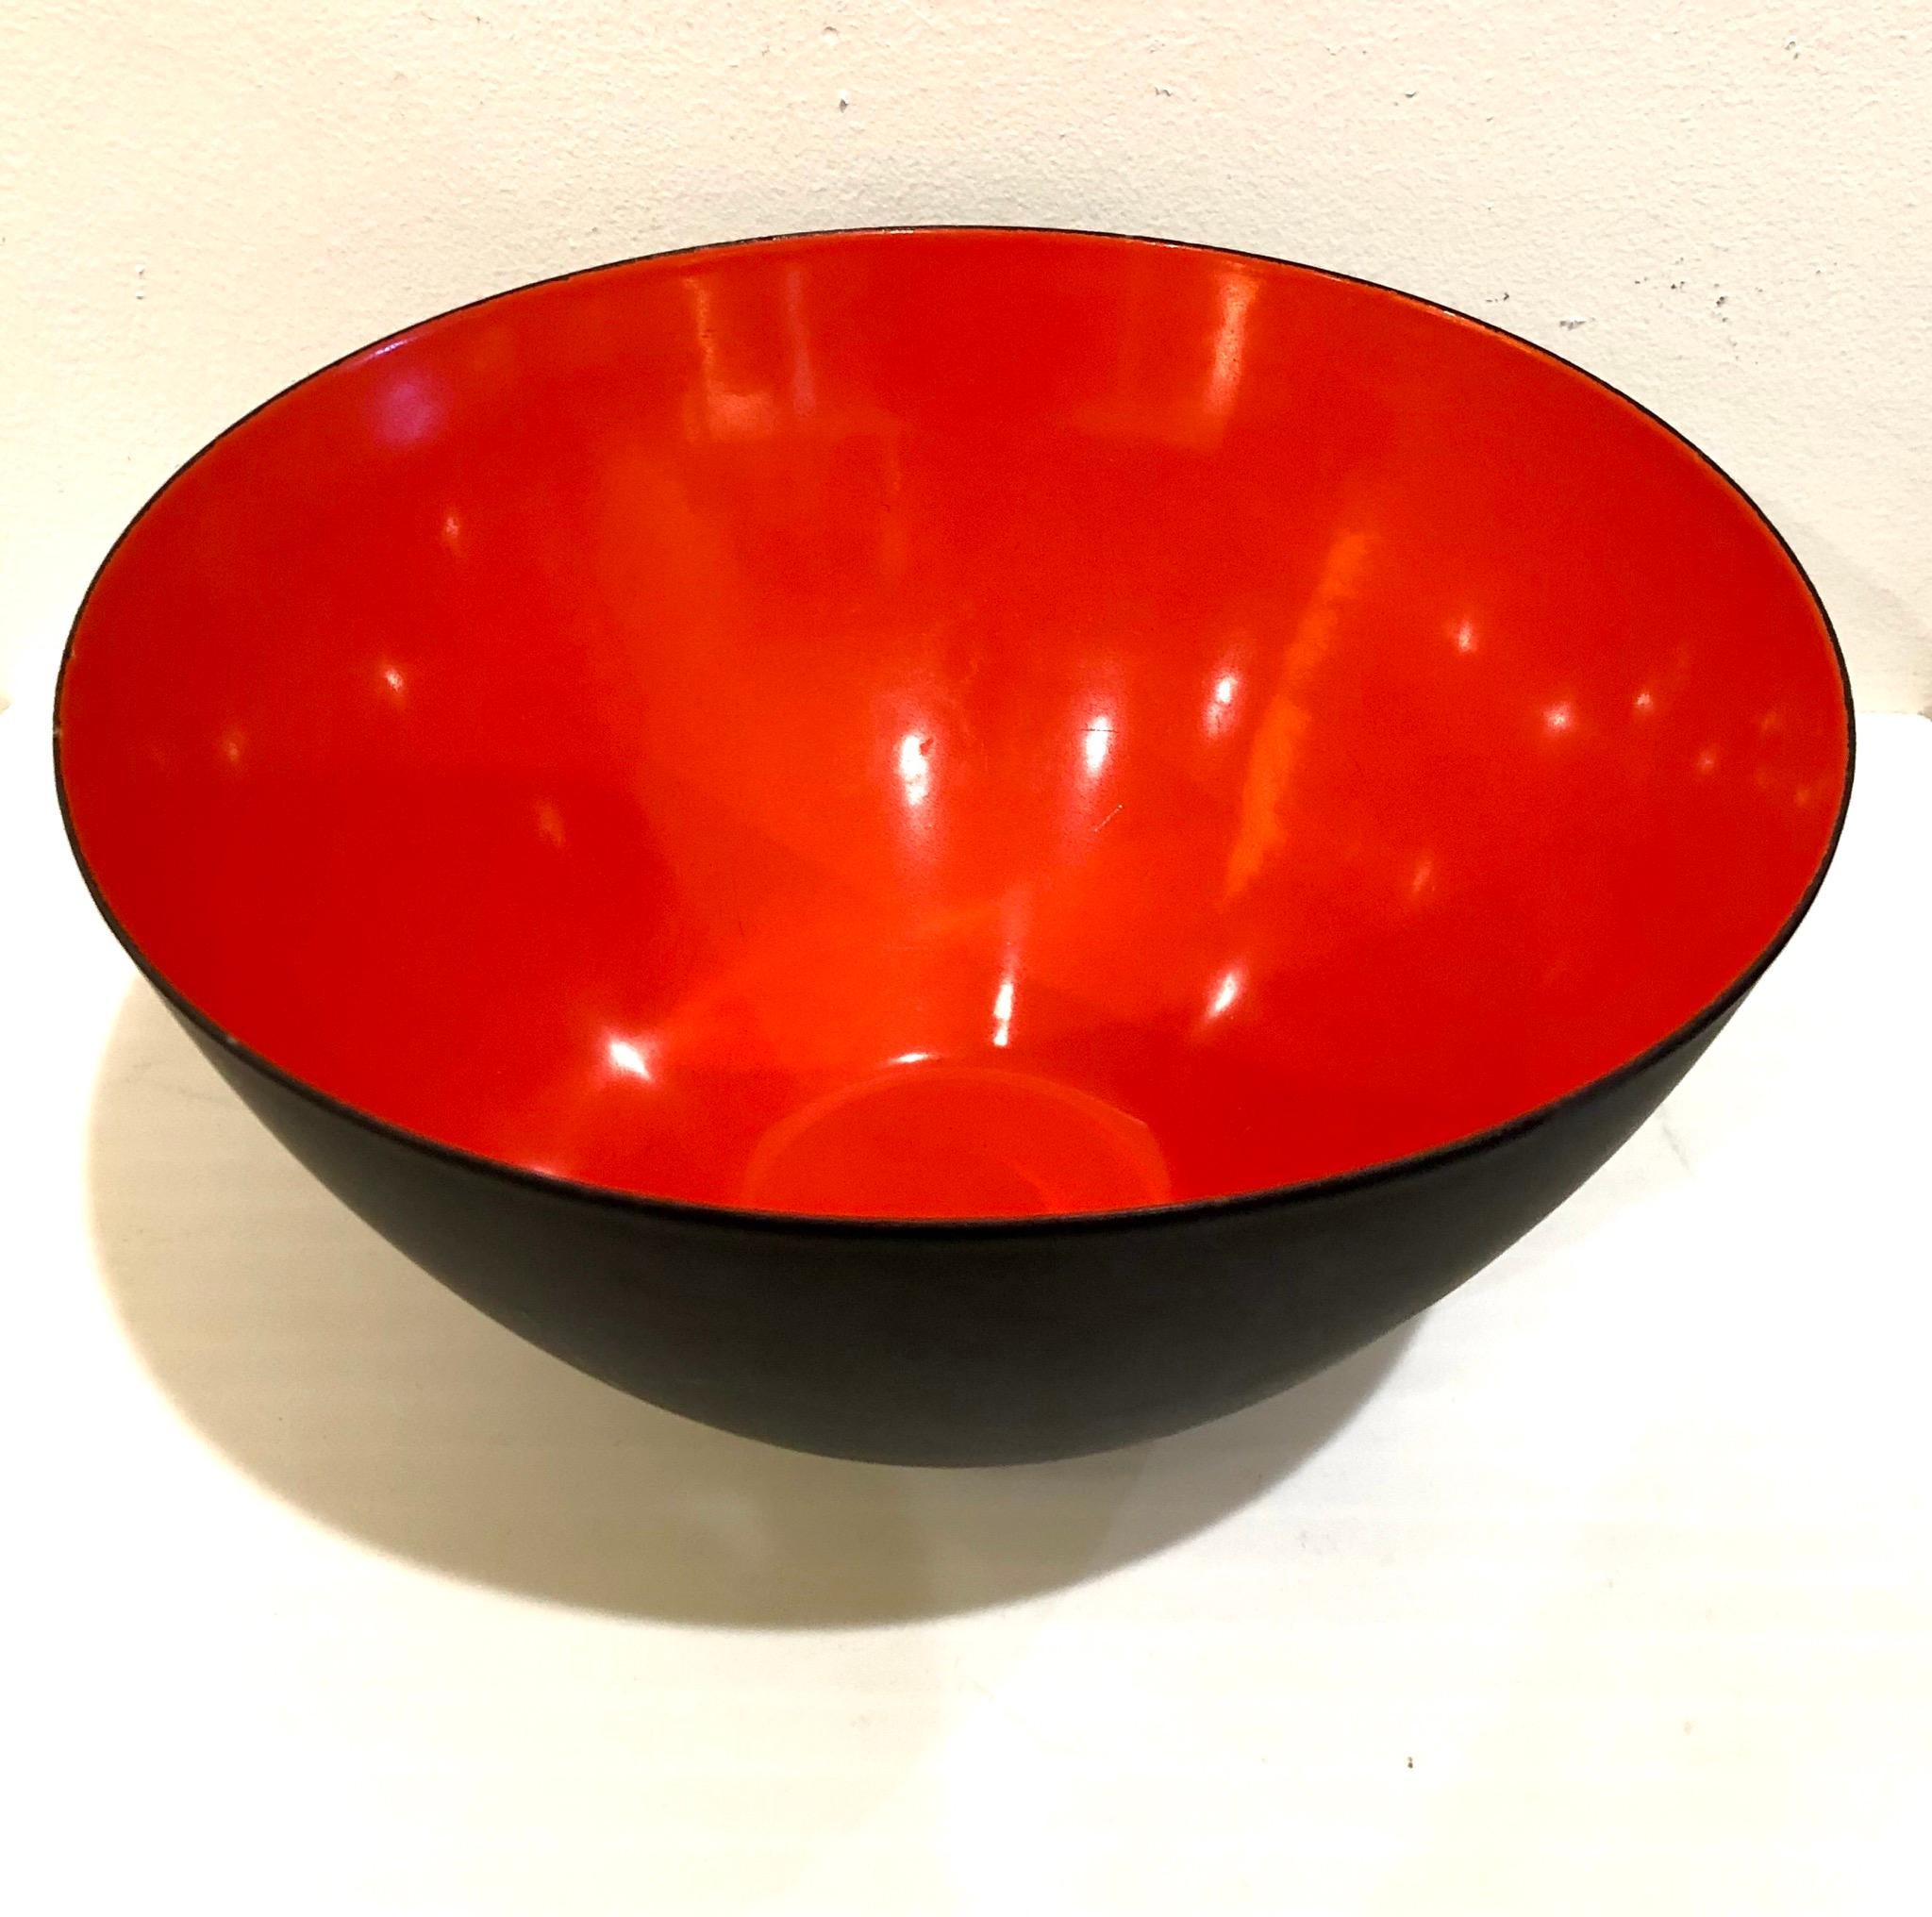 Beautiful color and condition on this vintage metal enamel Krenit bowl, designed by Herbert Krenchel for Torben Orskov, circa 1950s, great condition. With high wear on the outside.